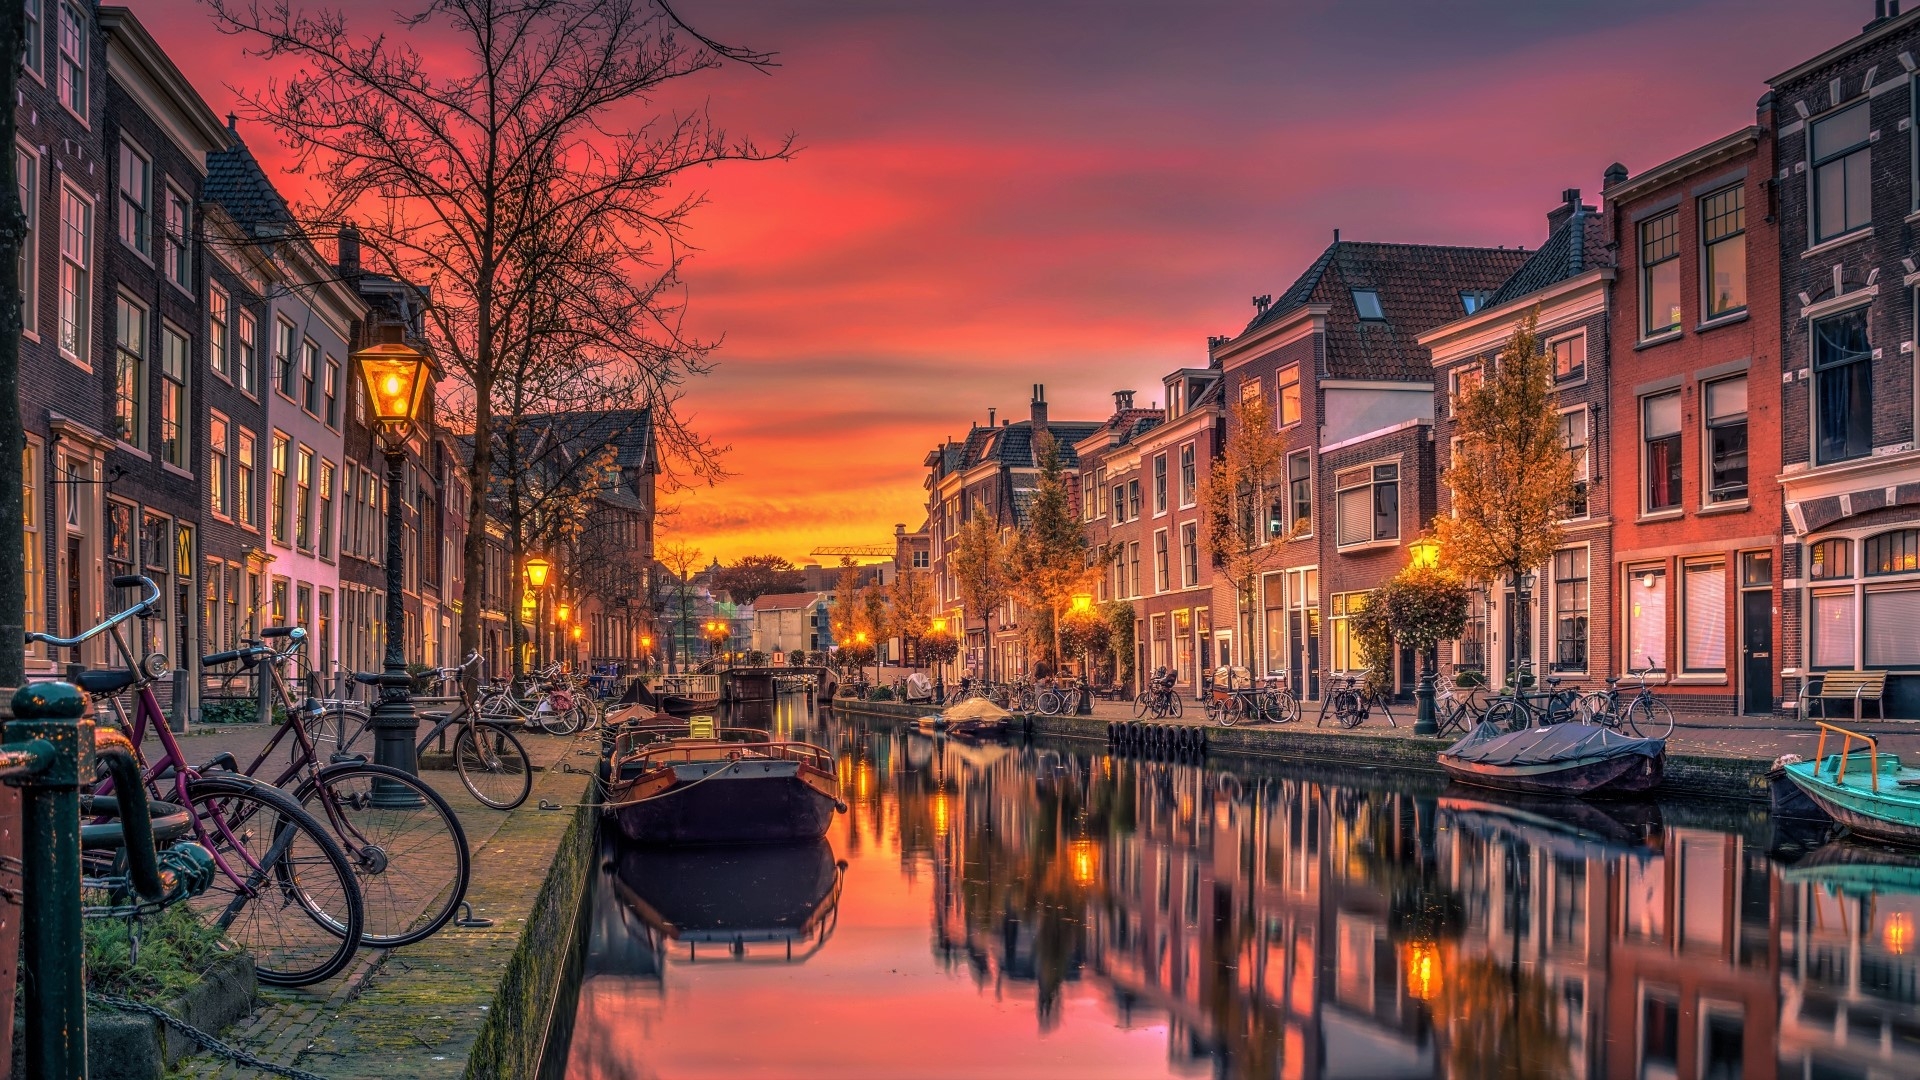 Amsterdam, Canal, Sunset, Houses, Bicycle, Boats, Germany - Netherlands Wallpaper 4k - HD Wallpaper 